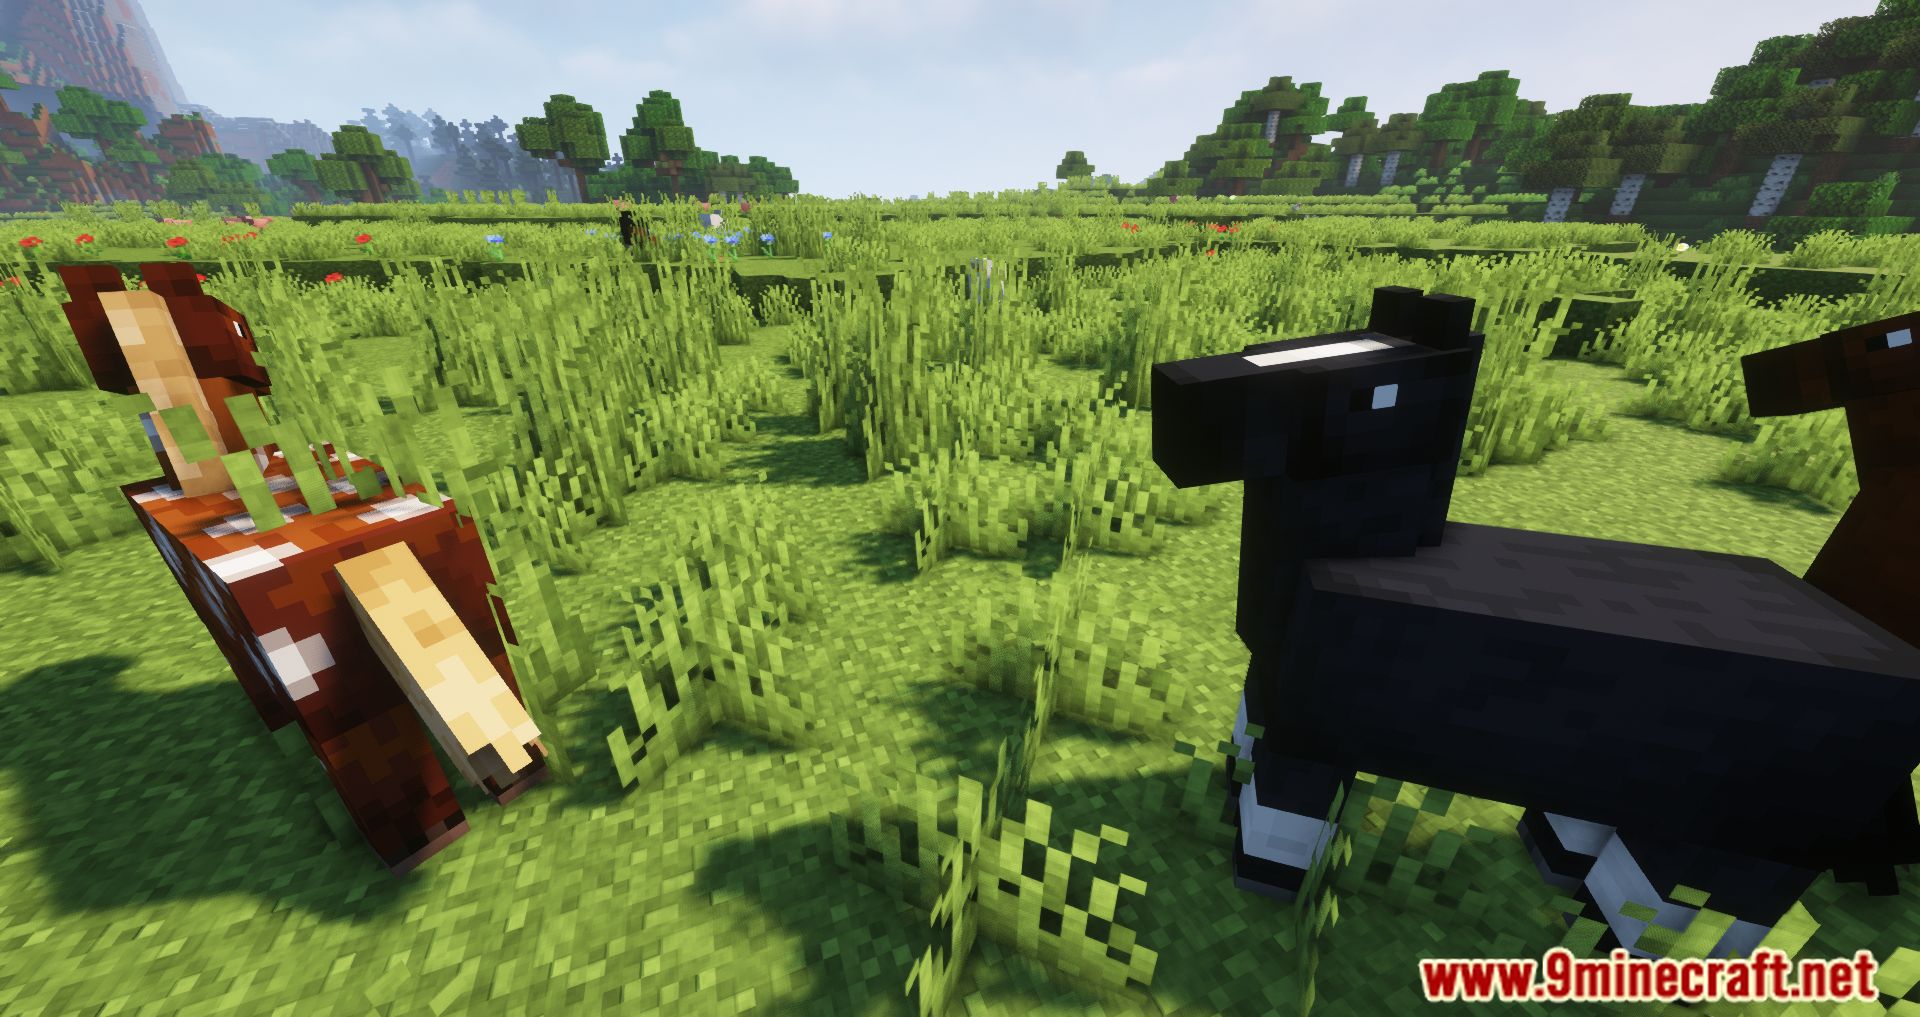 Two Players One Horse Mod (1.16.5) - Join The Ride - 9Minecraft.Net